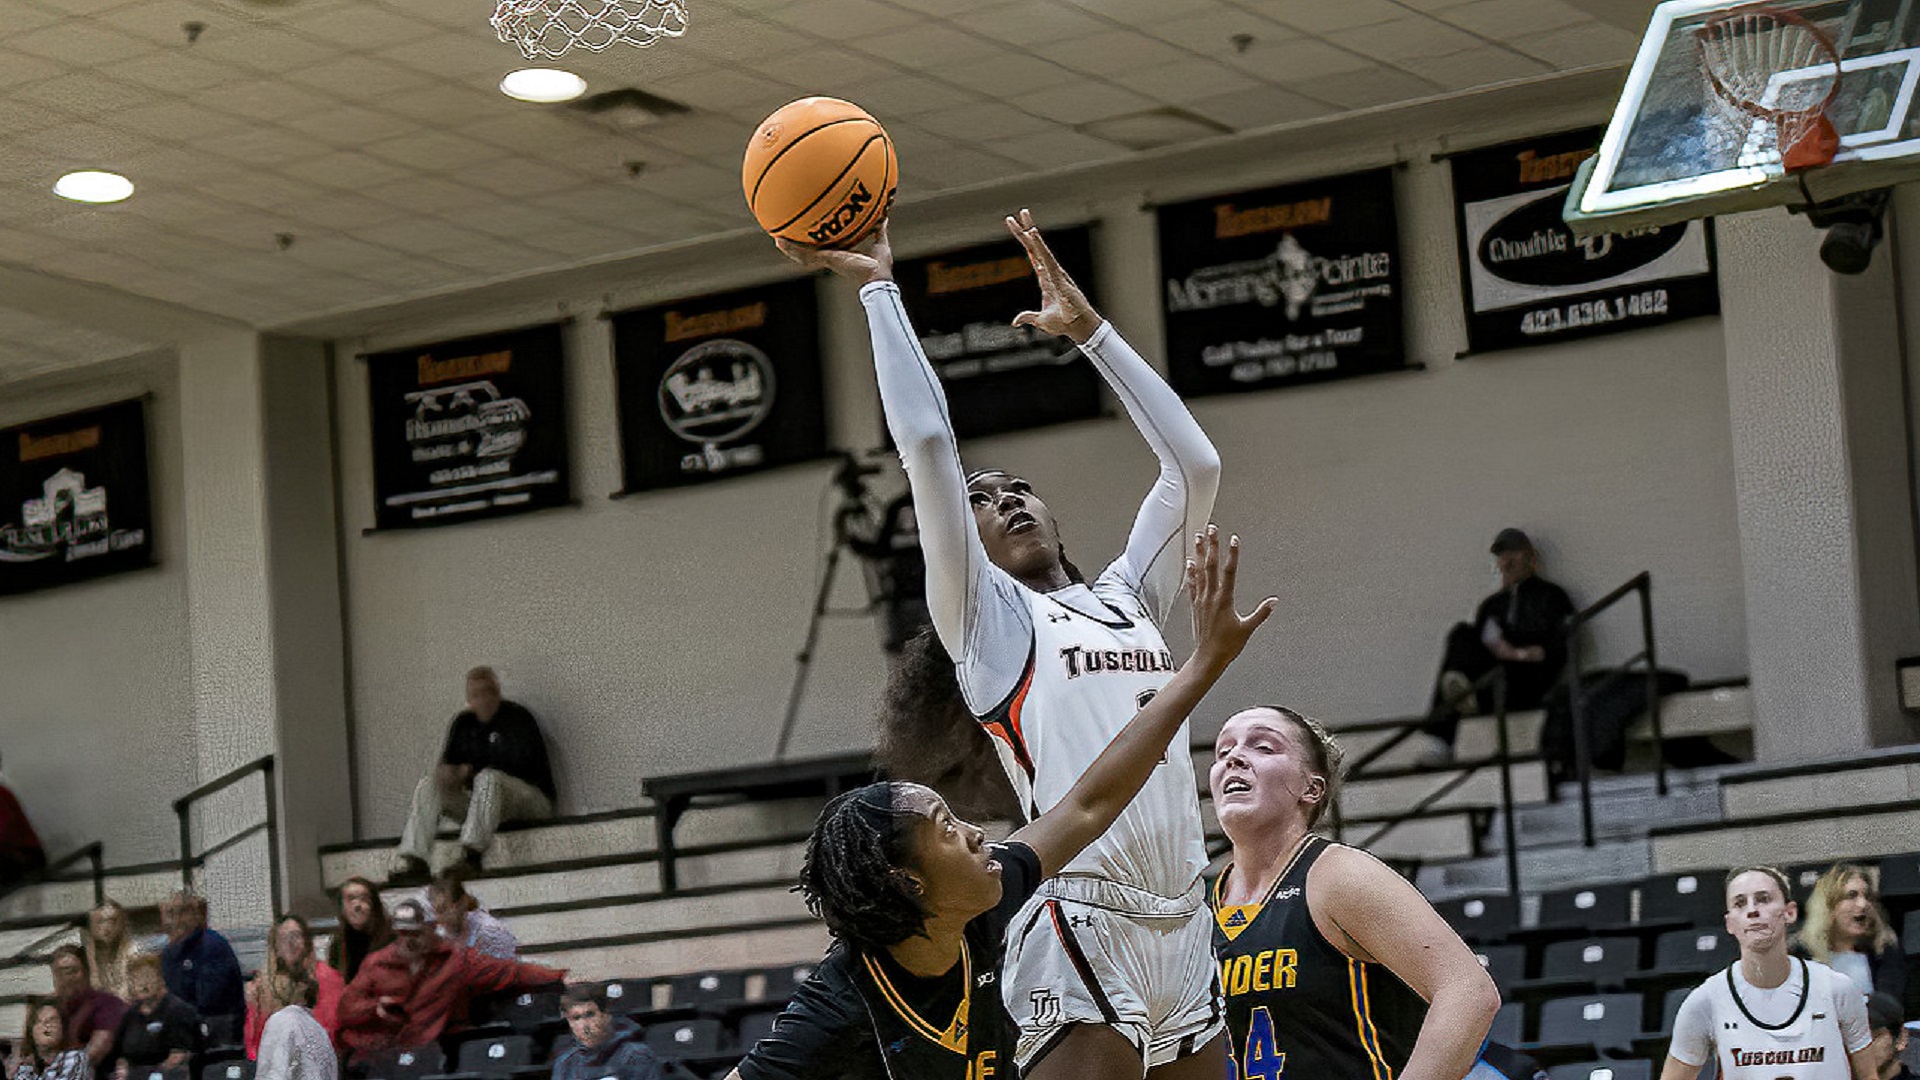 Deidre Cheremond finished with 16 points and seven rebounds in 13 minutes against Lander (photo by Chuck Williams)